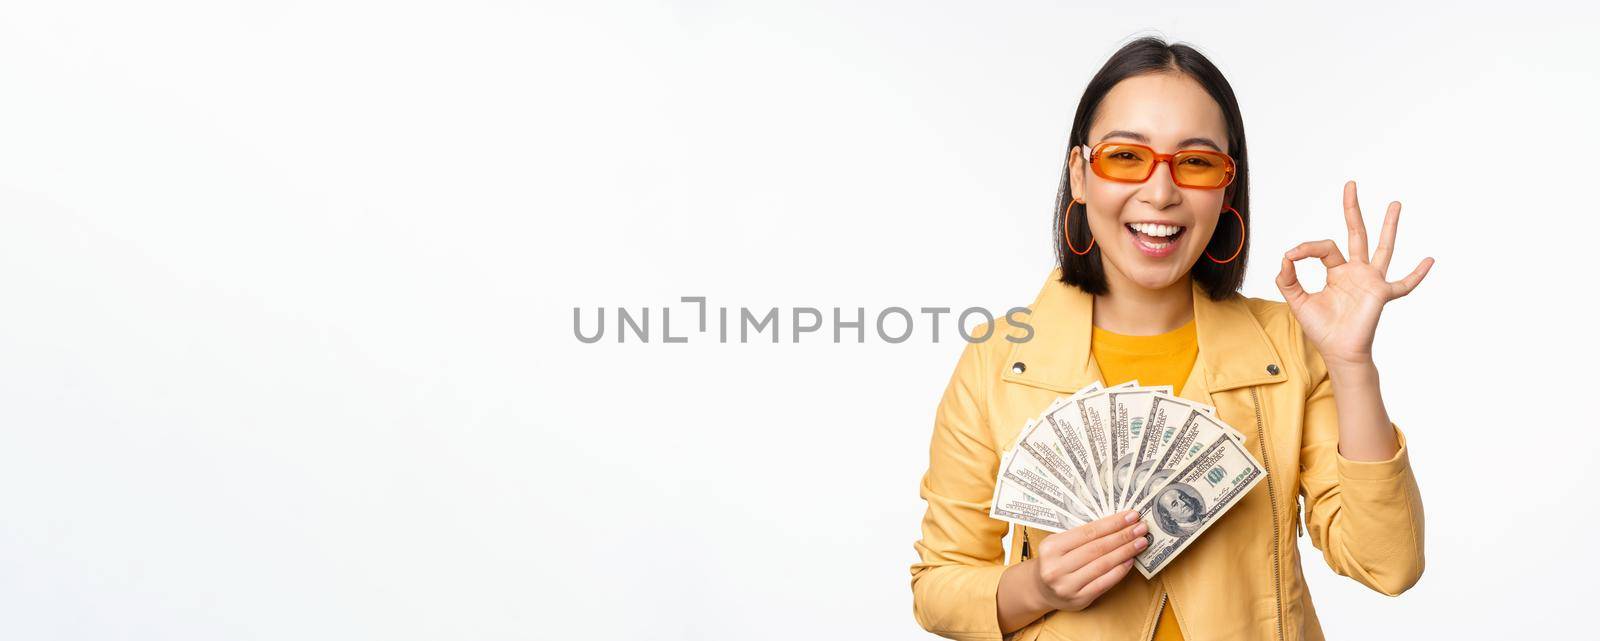 Microcredit and loans concept. Happy stylish korean girl showing okay sign, ok and money, dollars cash, standing in trendy clothes over white background.